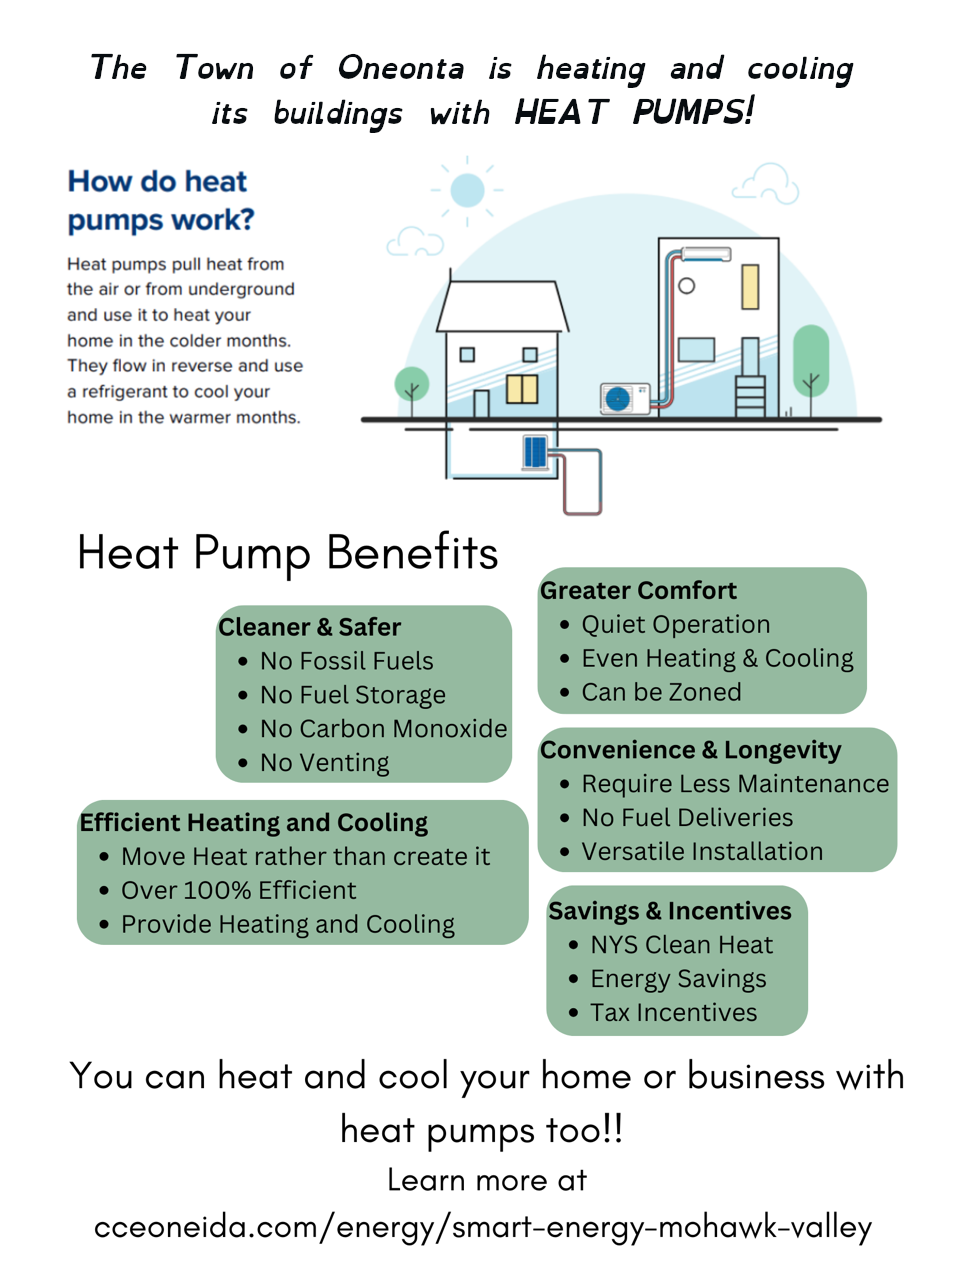 Heat pumps could work for you.